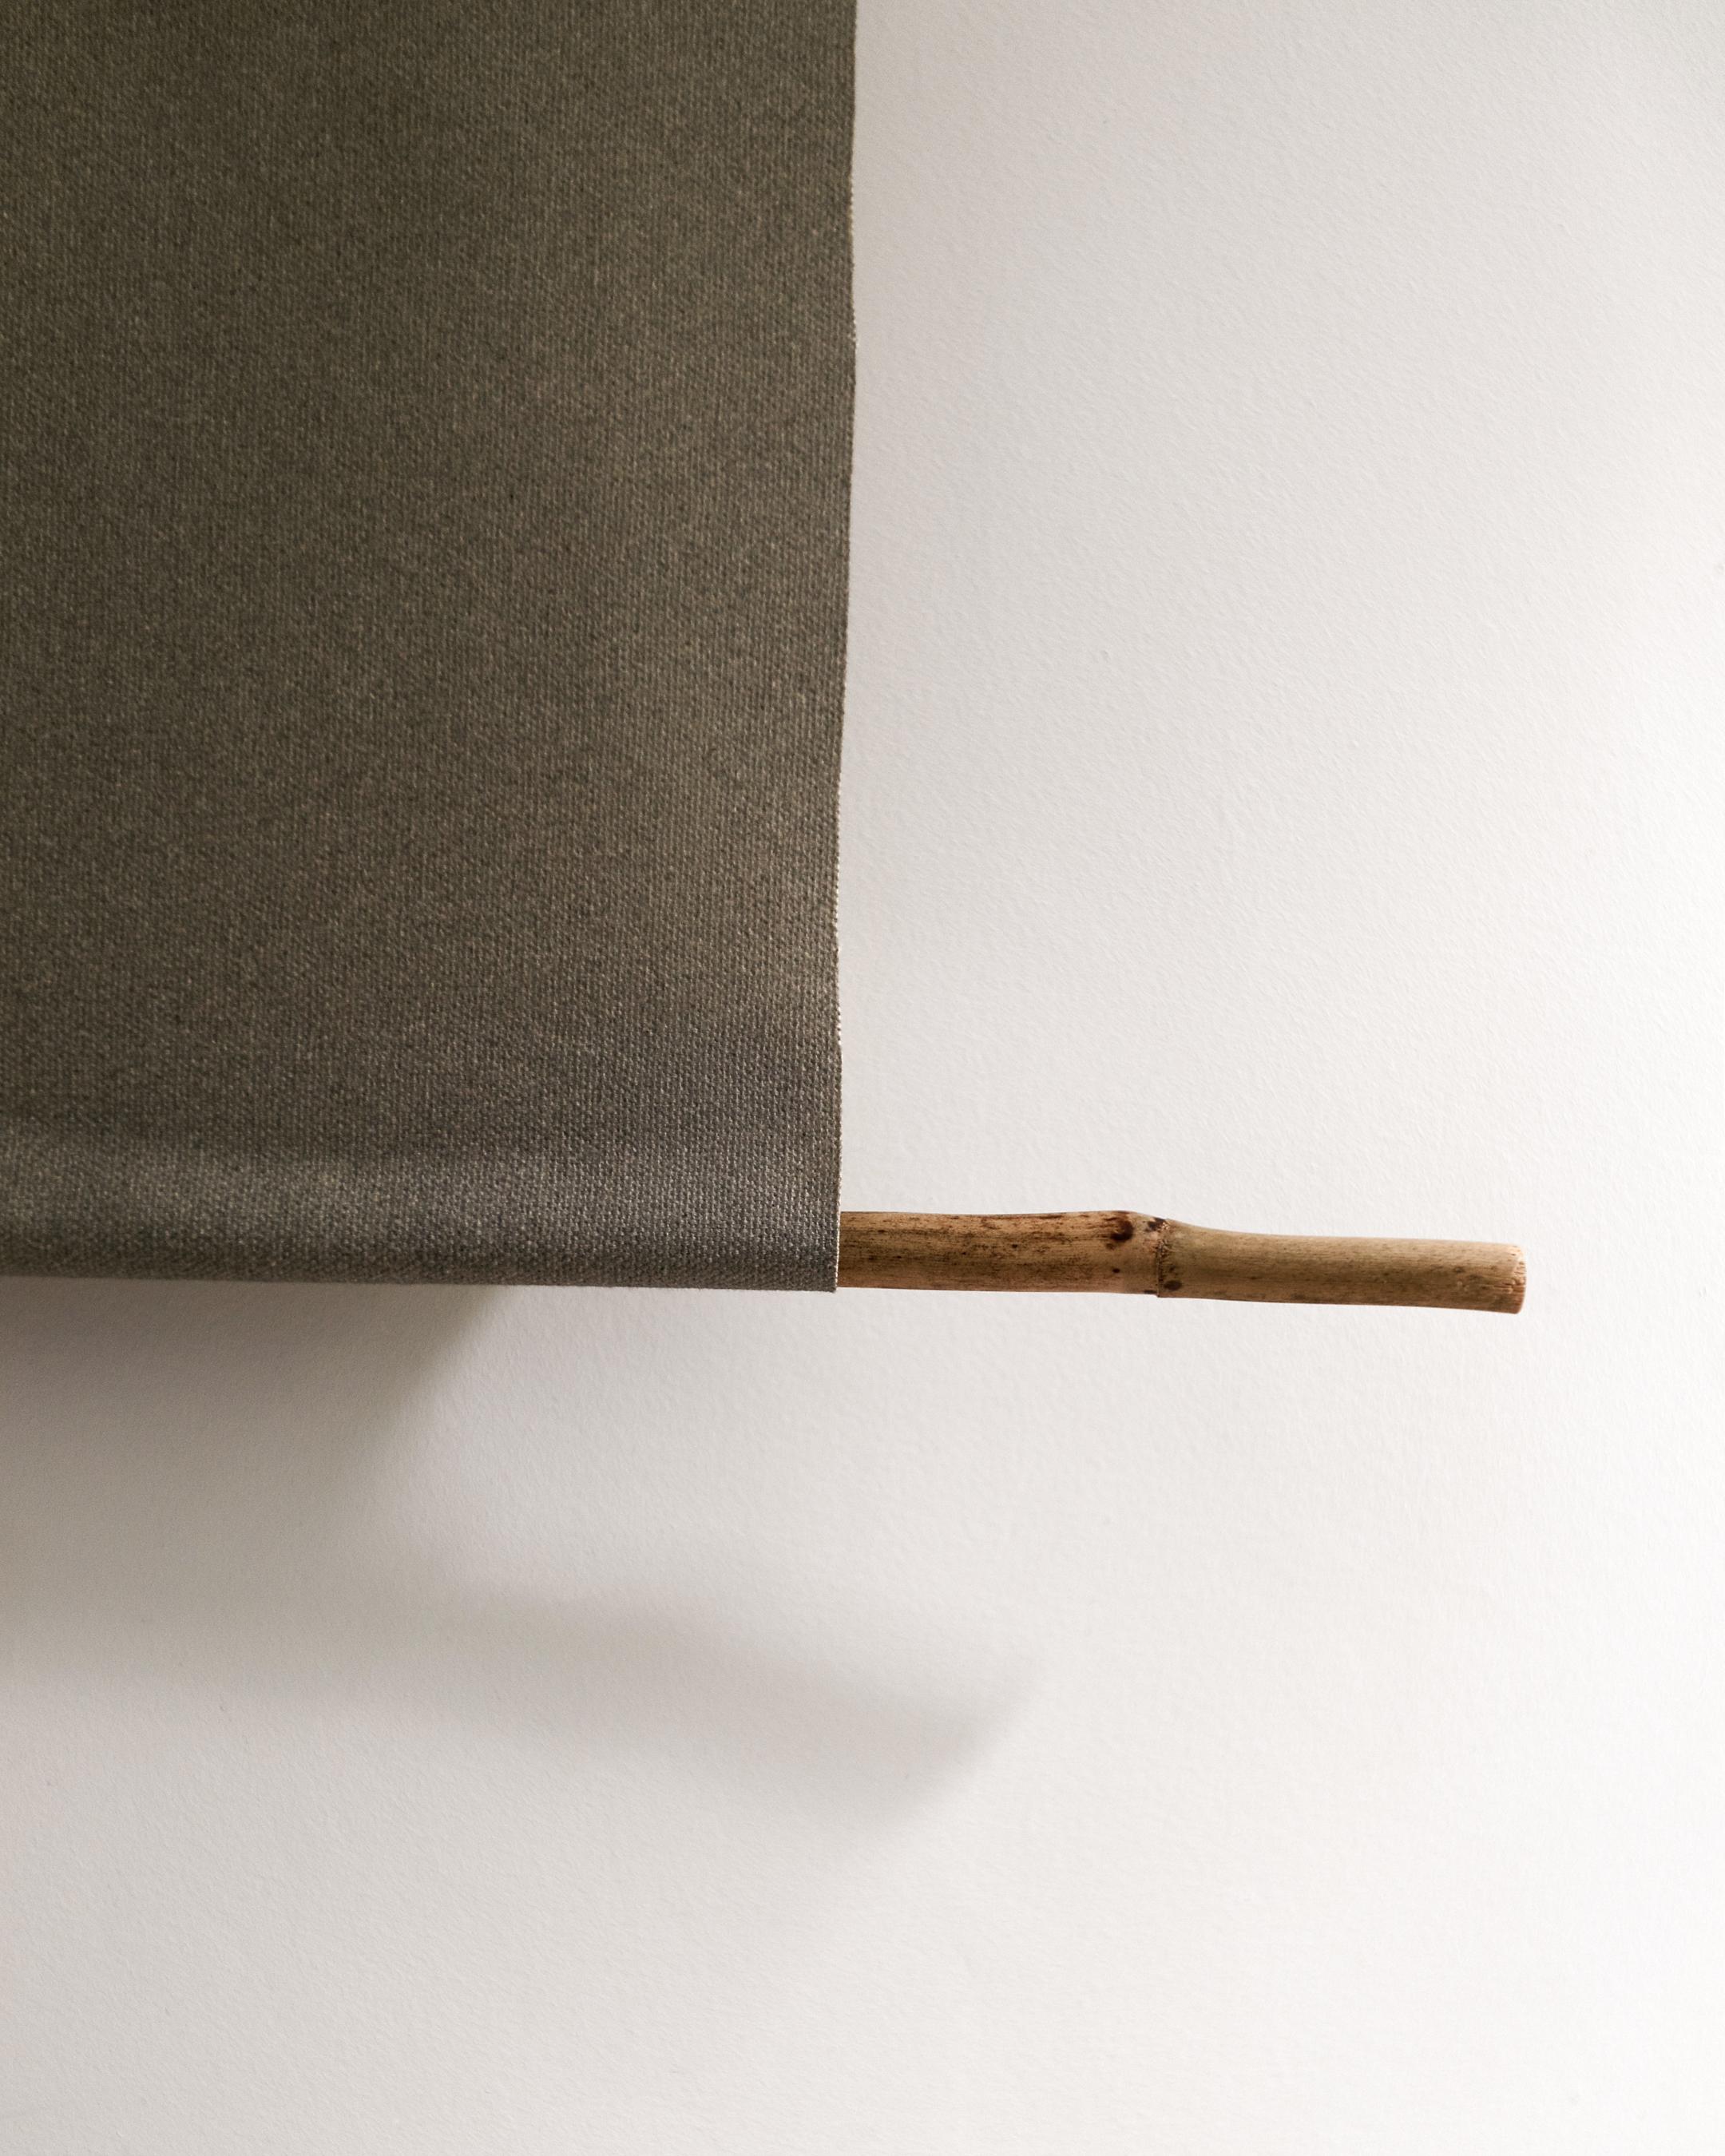 Lily No.3 - organic cotton canvas scroll on bamboo, limited edition of 5 - Photograph by Ugne Pouwell